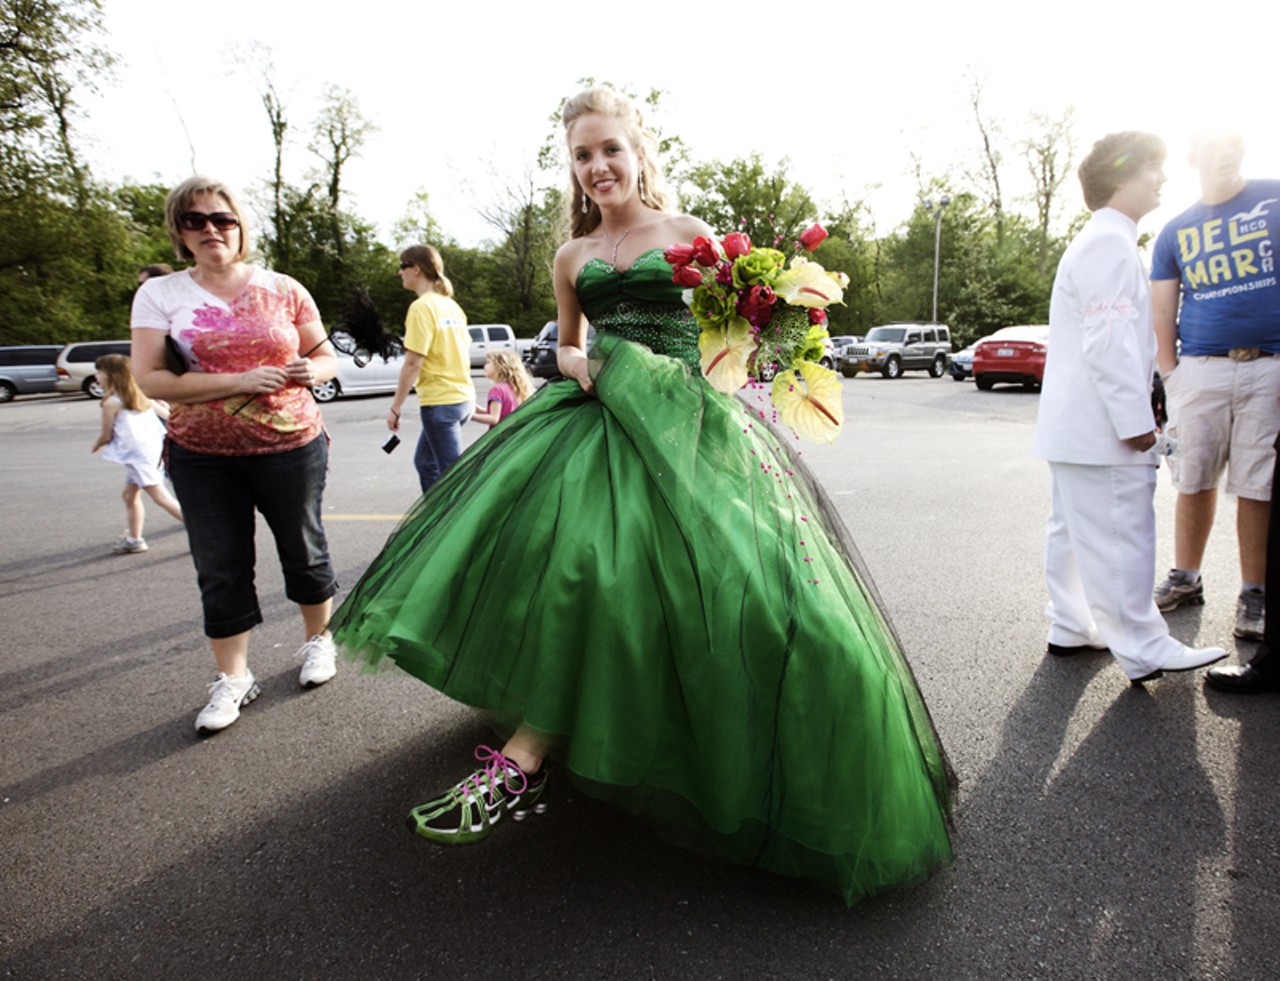 Jordan Sheraka opted for color coordinated track shoes beneath her prom gown.